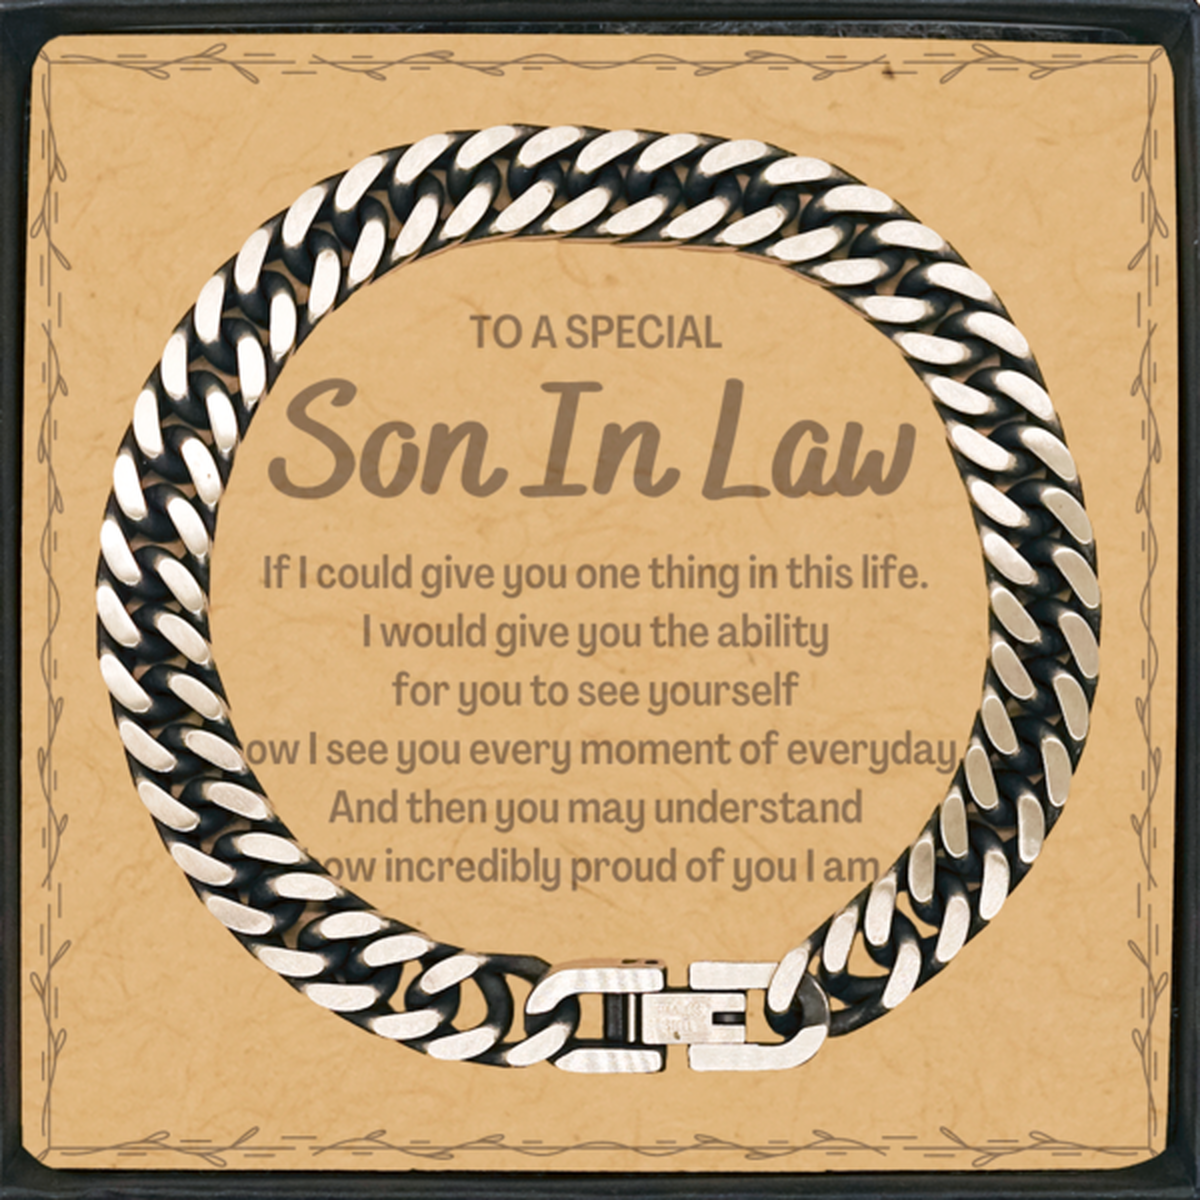 To My Son In Law Cuban Link Chain Bracelet, Gifts For Son In Law Message Card, Inspirational Gifts for Christmas Birthday, Epic Gifts for Son In Law To A Special Son In Law how incredibly proud of you I am